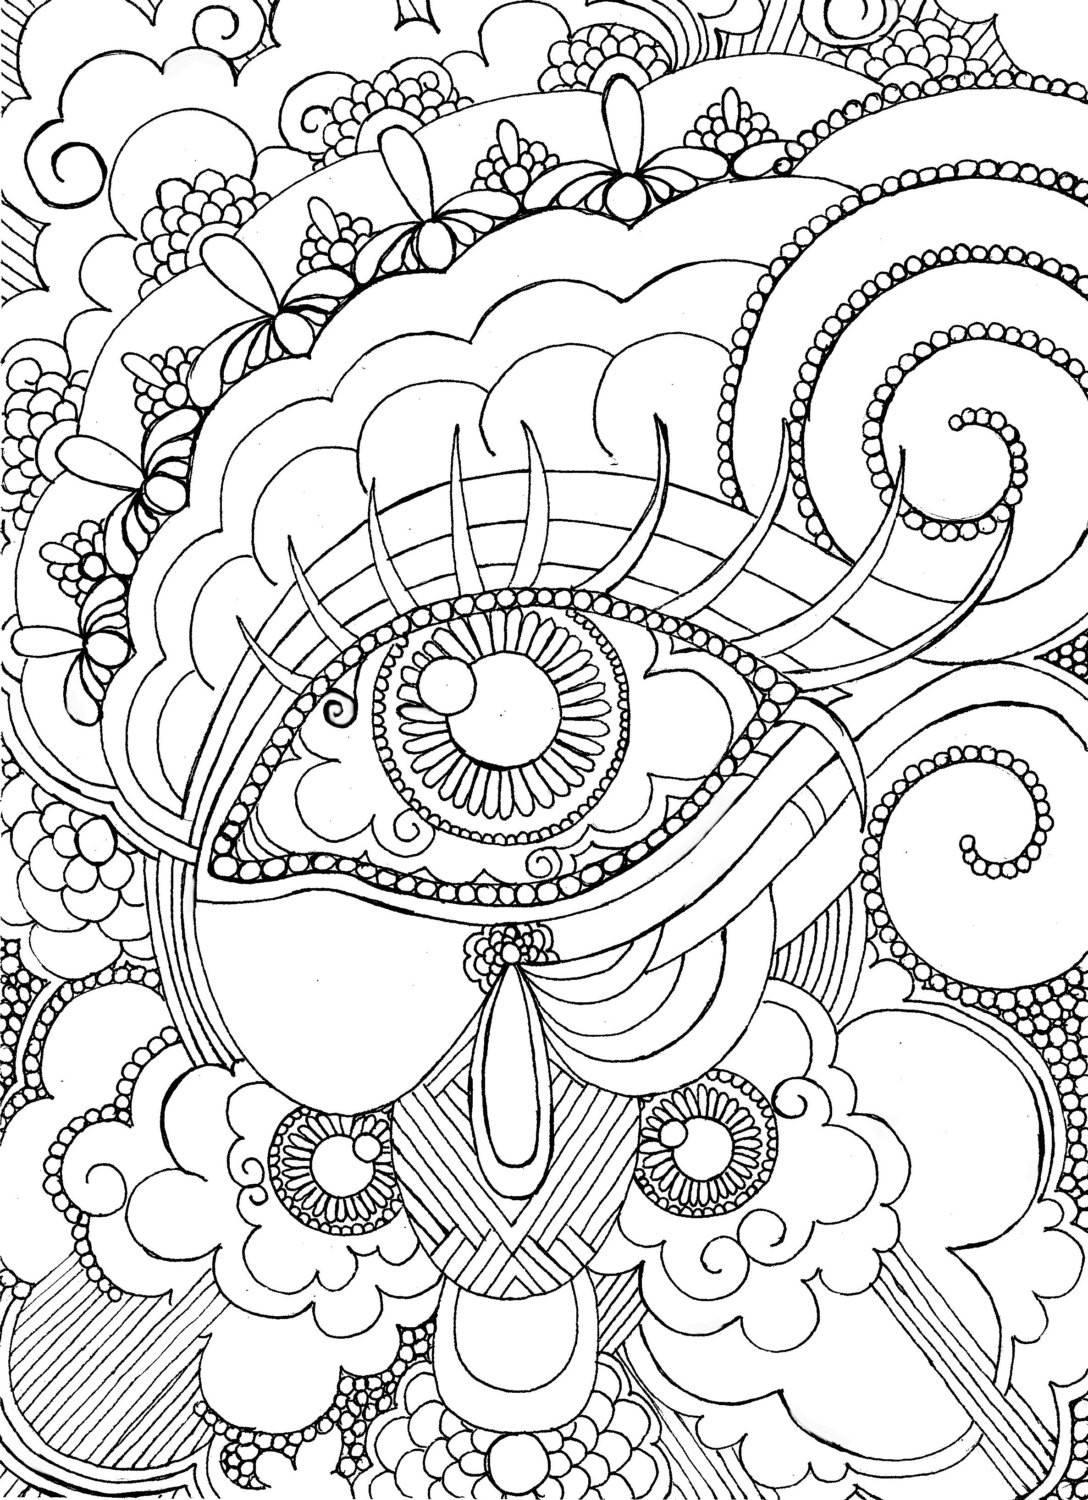 Detailed Coloring Books For Adults
 Eye Want To Be Colored Adult Coloring Page Steampunk